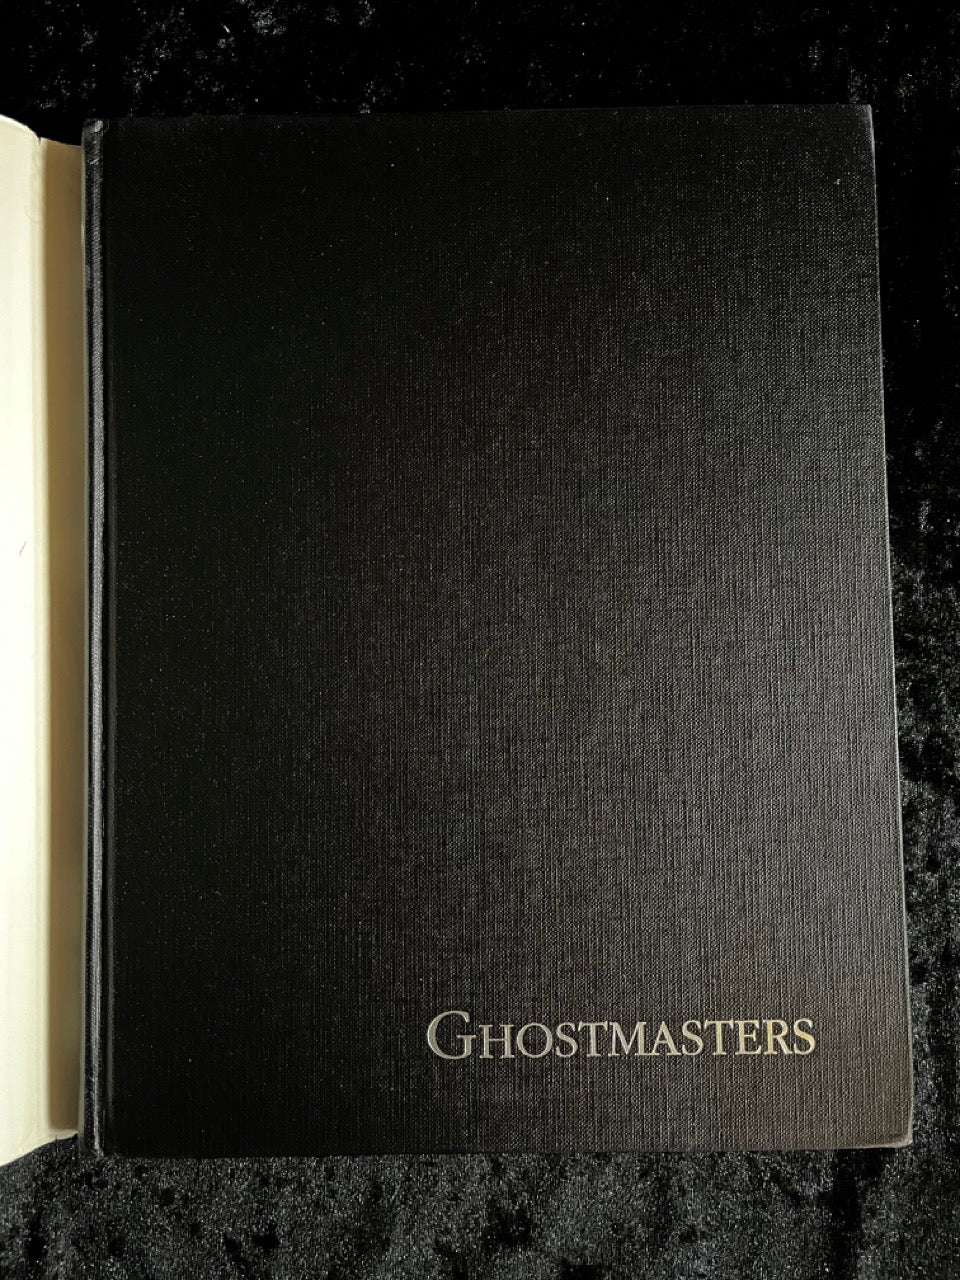 Ghostmasters - Mark Walker (2 Different Editions)